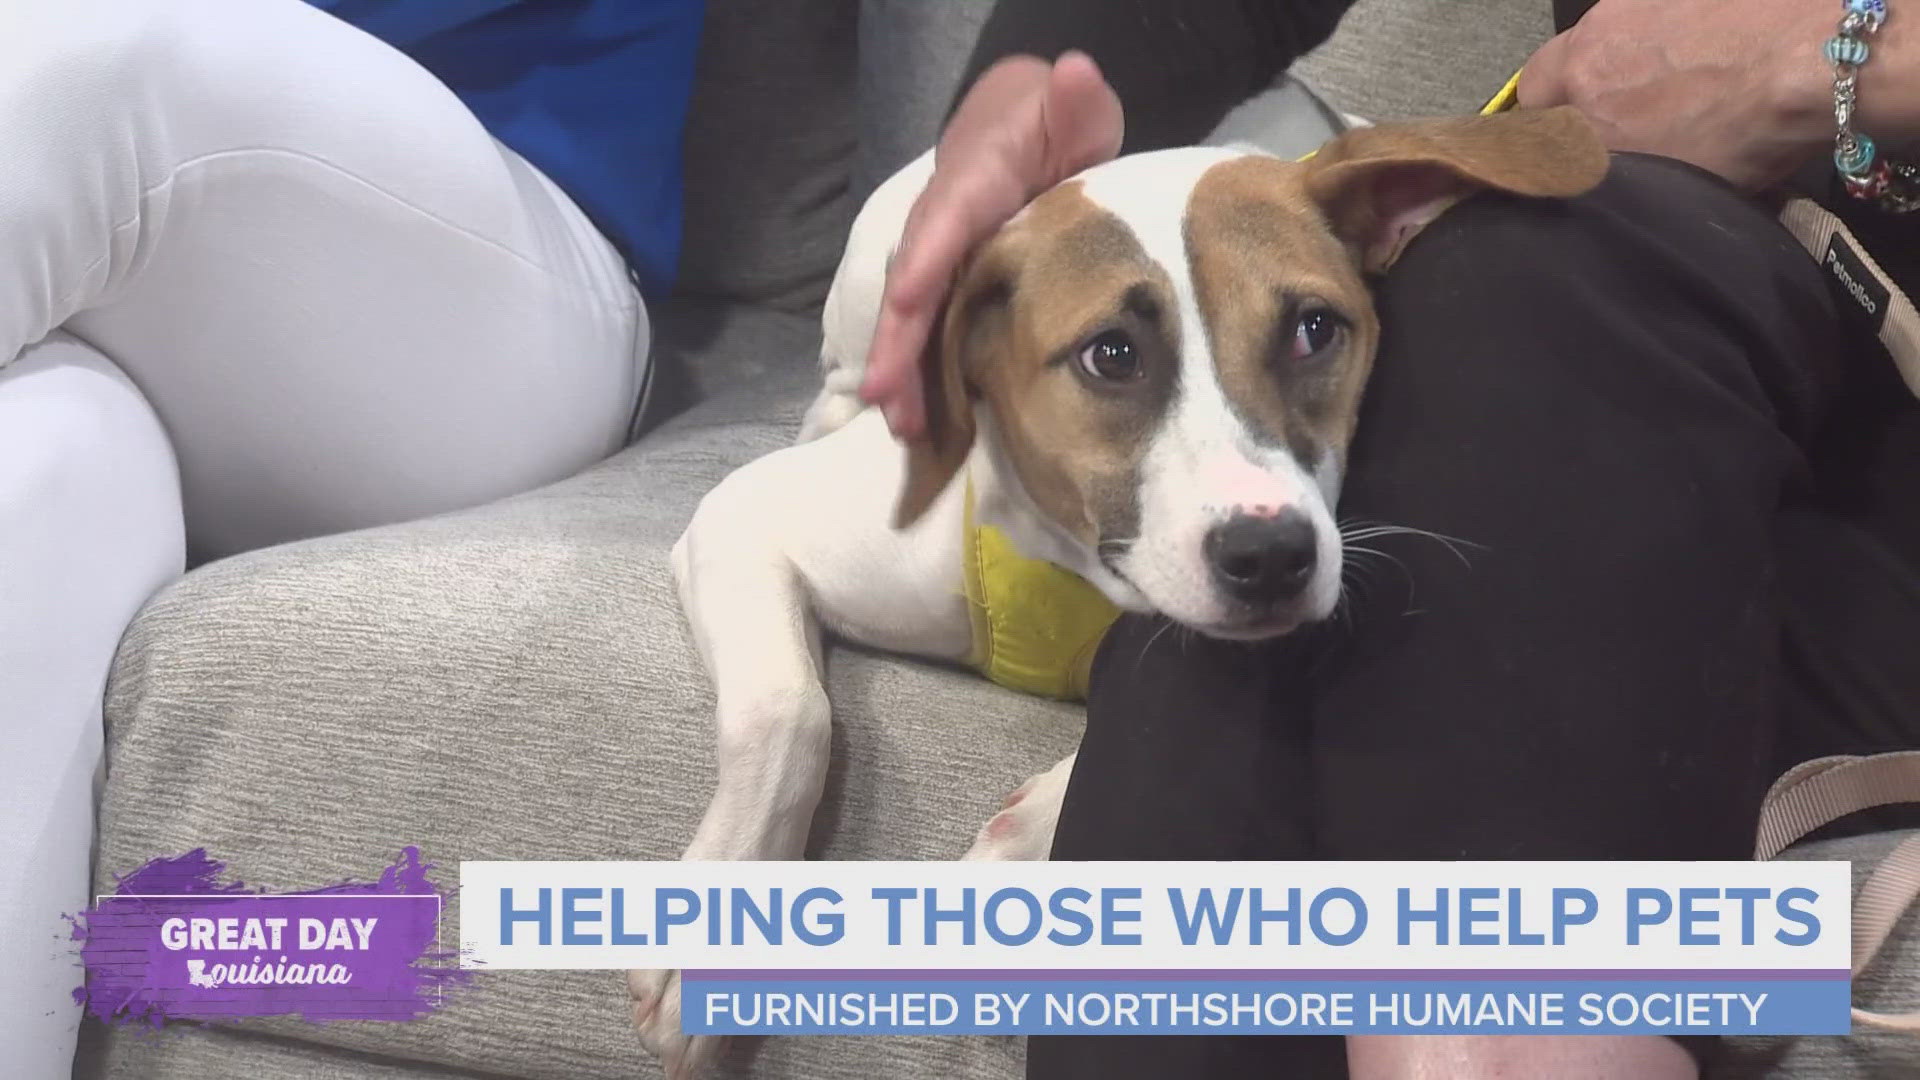 We learn more about the special fundraising matching for Northshore Humane Society coming up on Give NOLA Day.